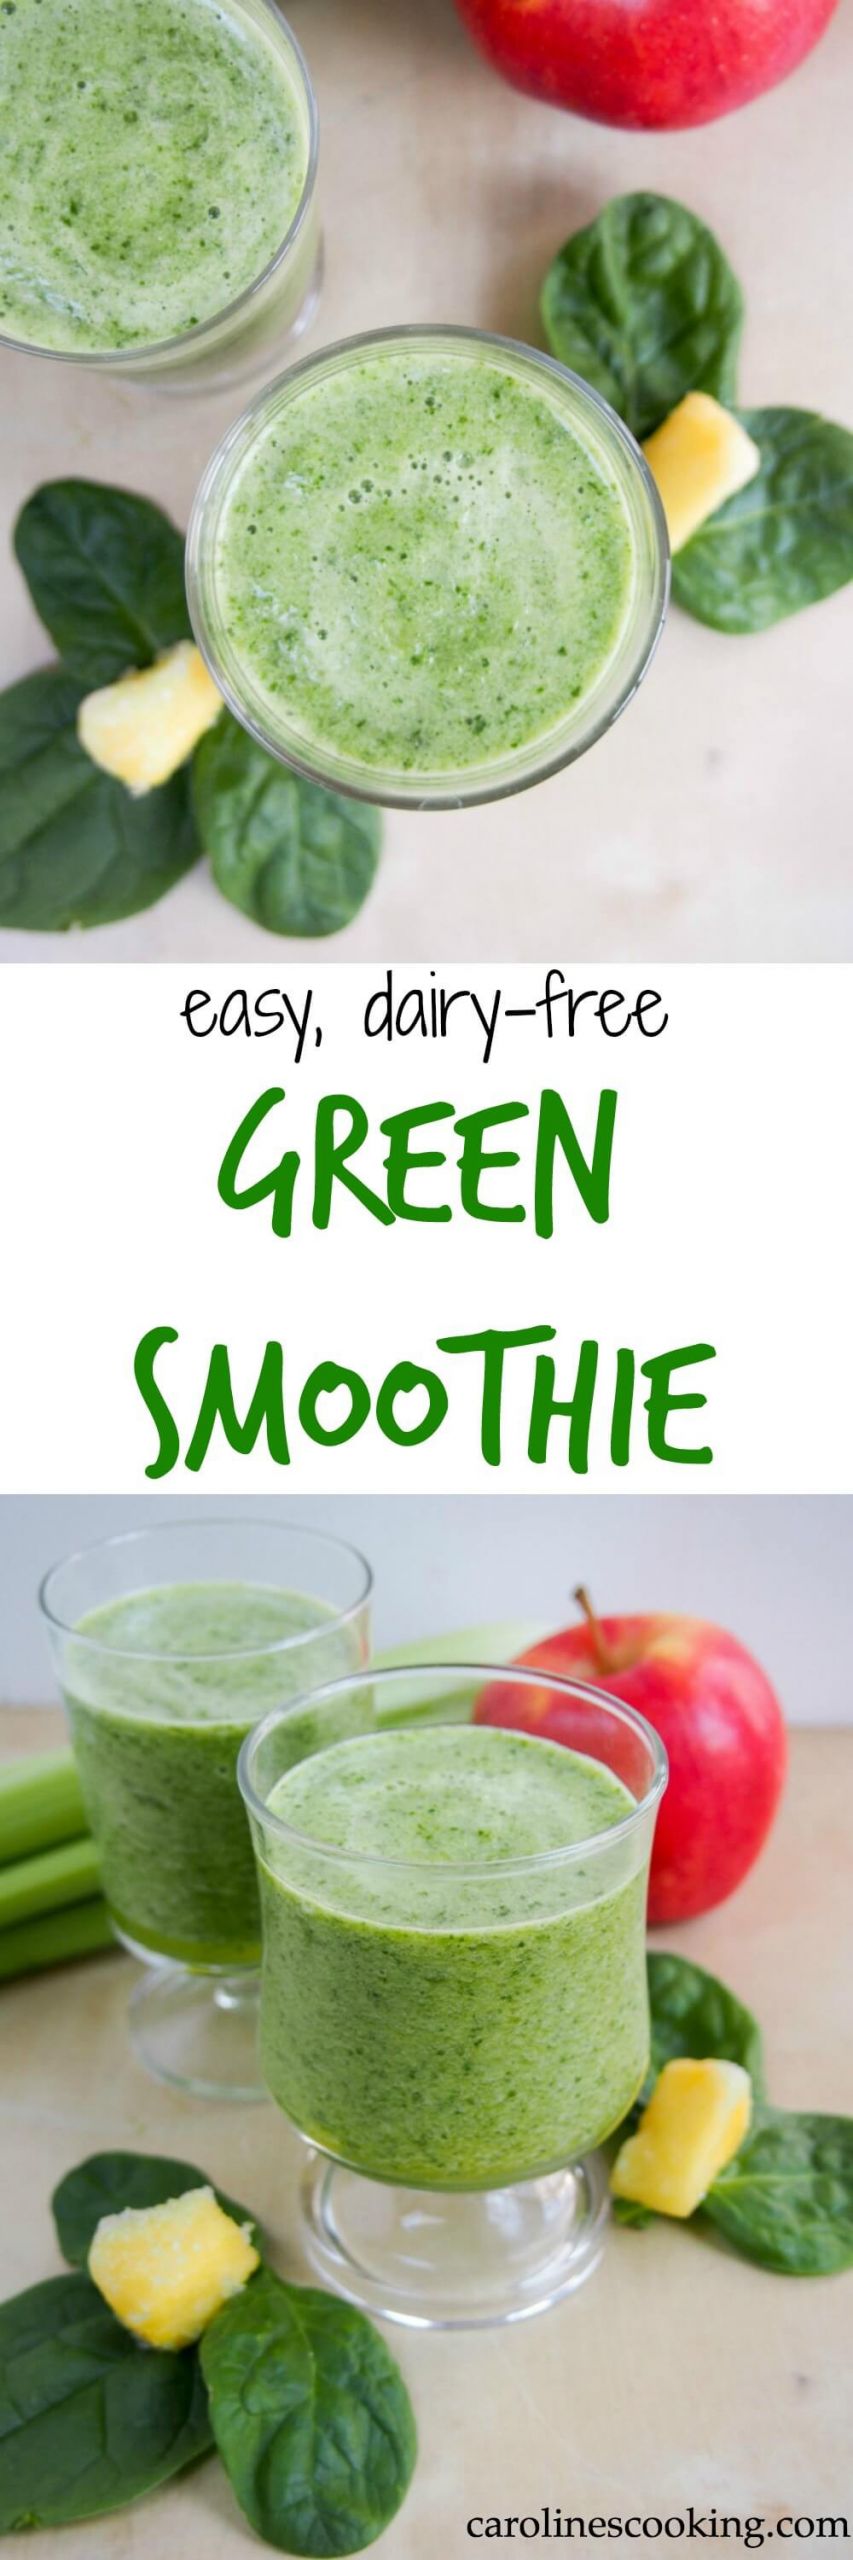 No Dairy Smoothies
 Easy dairy free green smoothie Caroline s Cooking